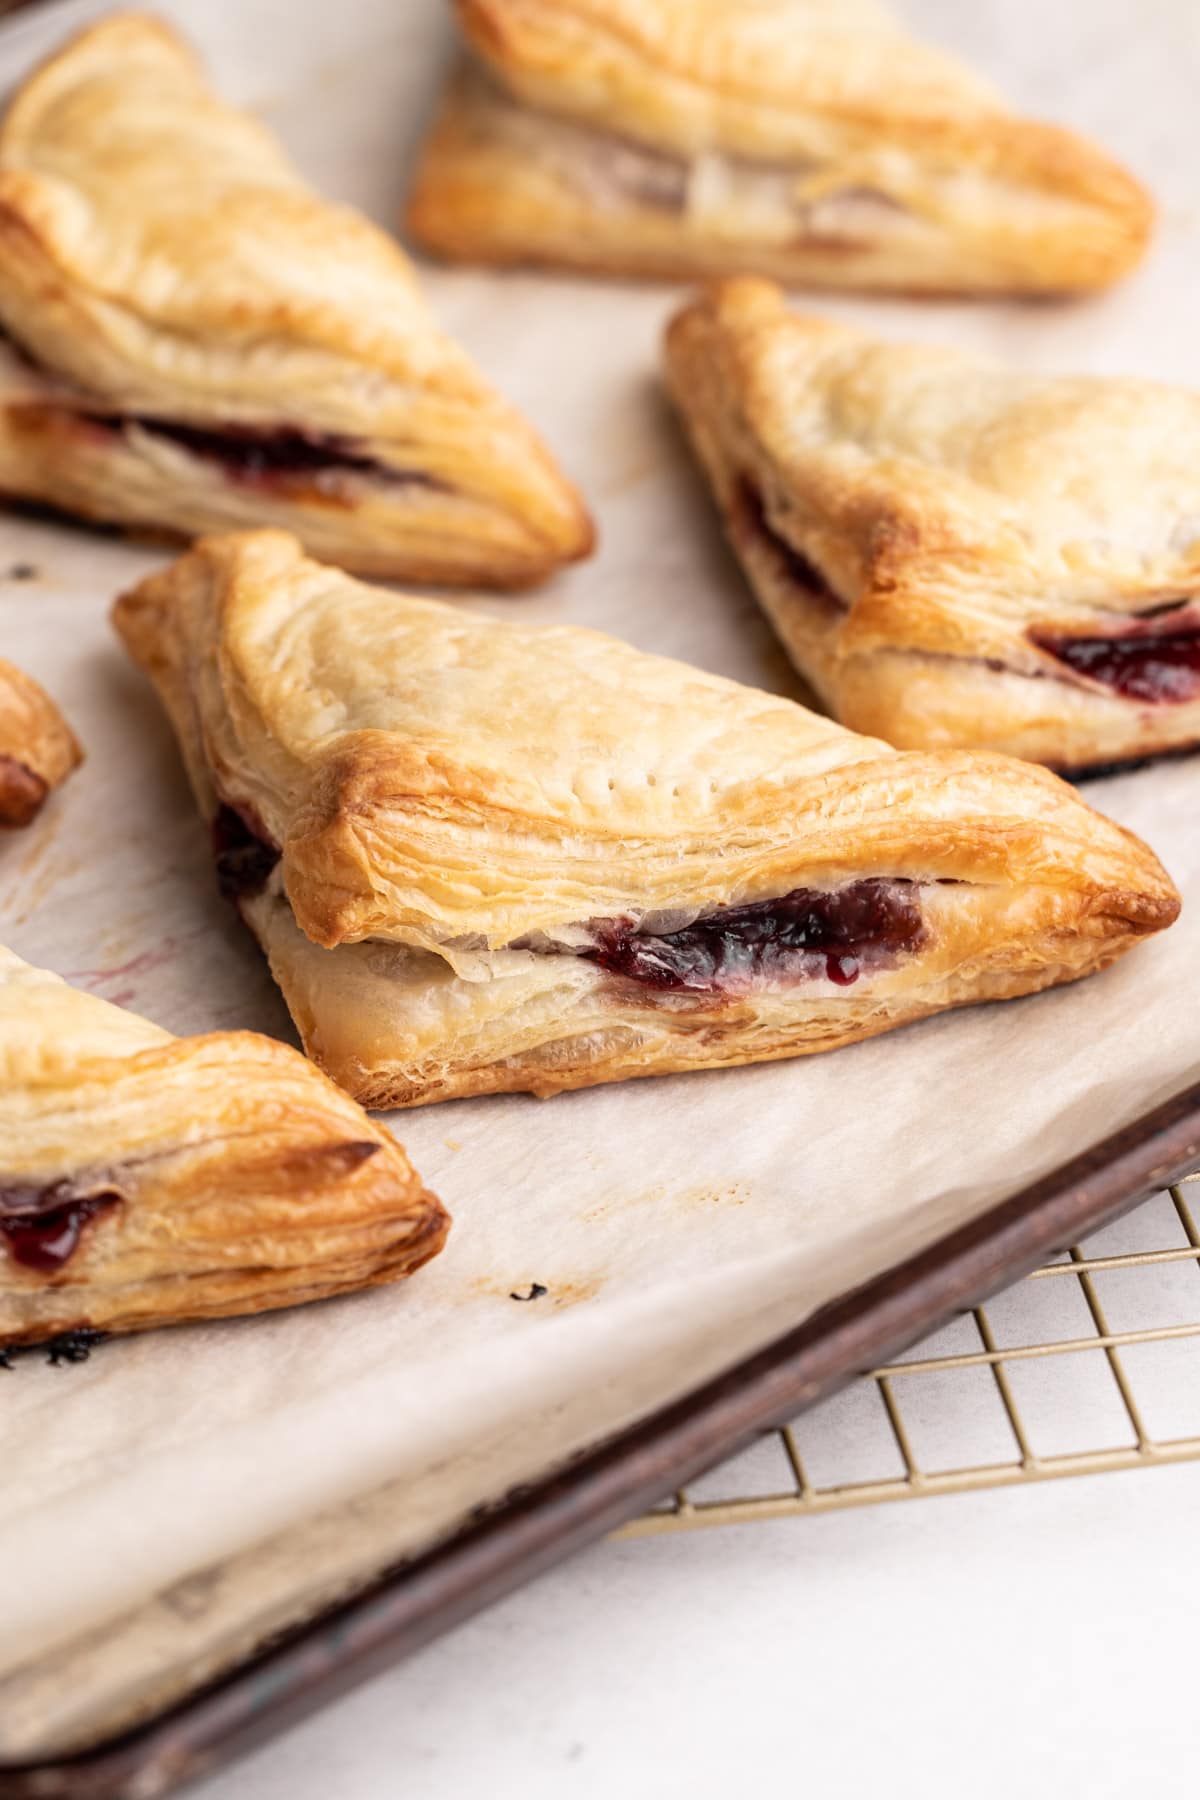 Baked cherry turnovers.